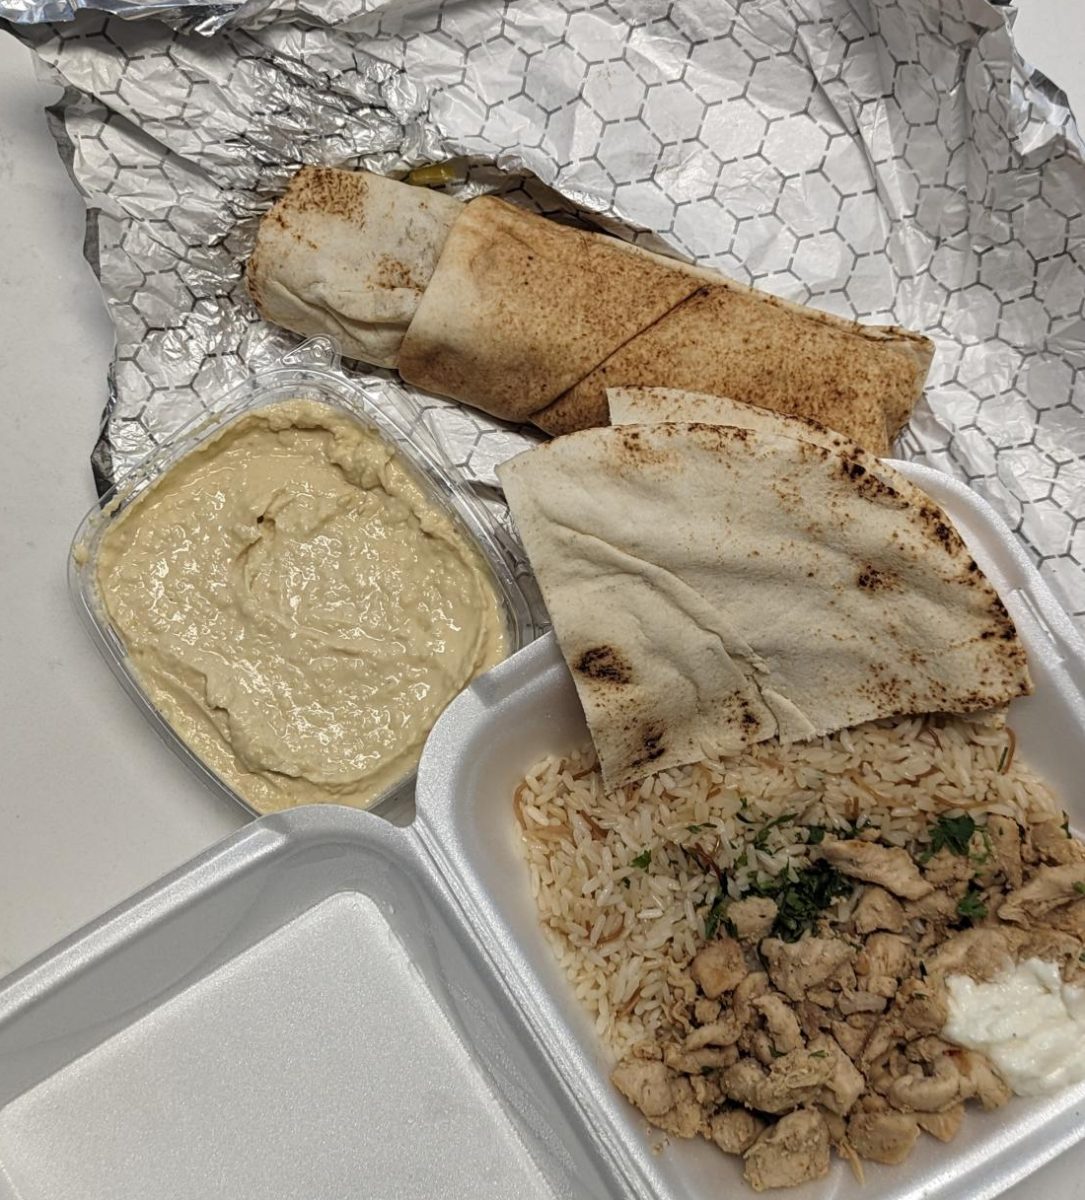 At the Raleigh “Taste of Lebanon” cultural festival various Lebanese foods were offered for visitors to try. Pictured above (clockwise) is a chicken shawarma sandwich, chicken shawarma rice platter, and hummus.
